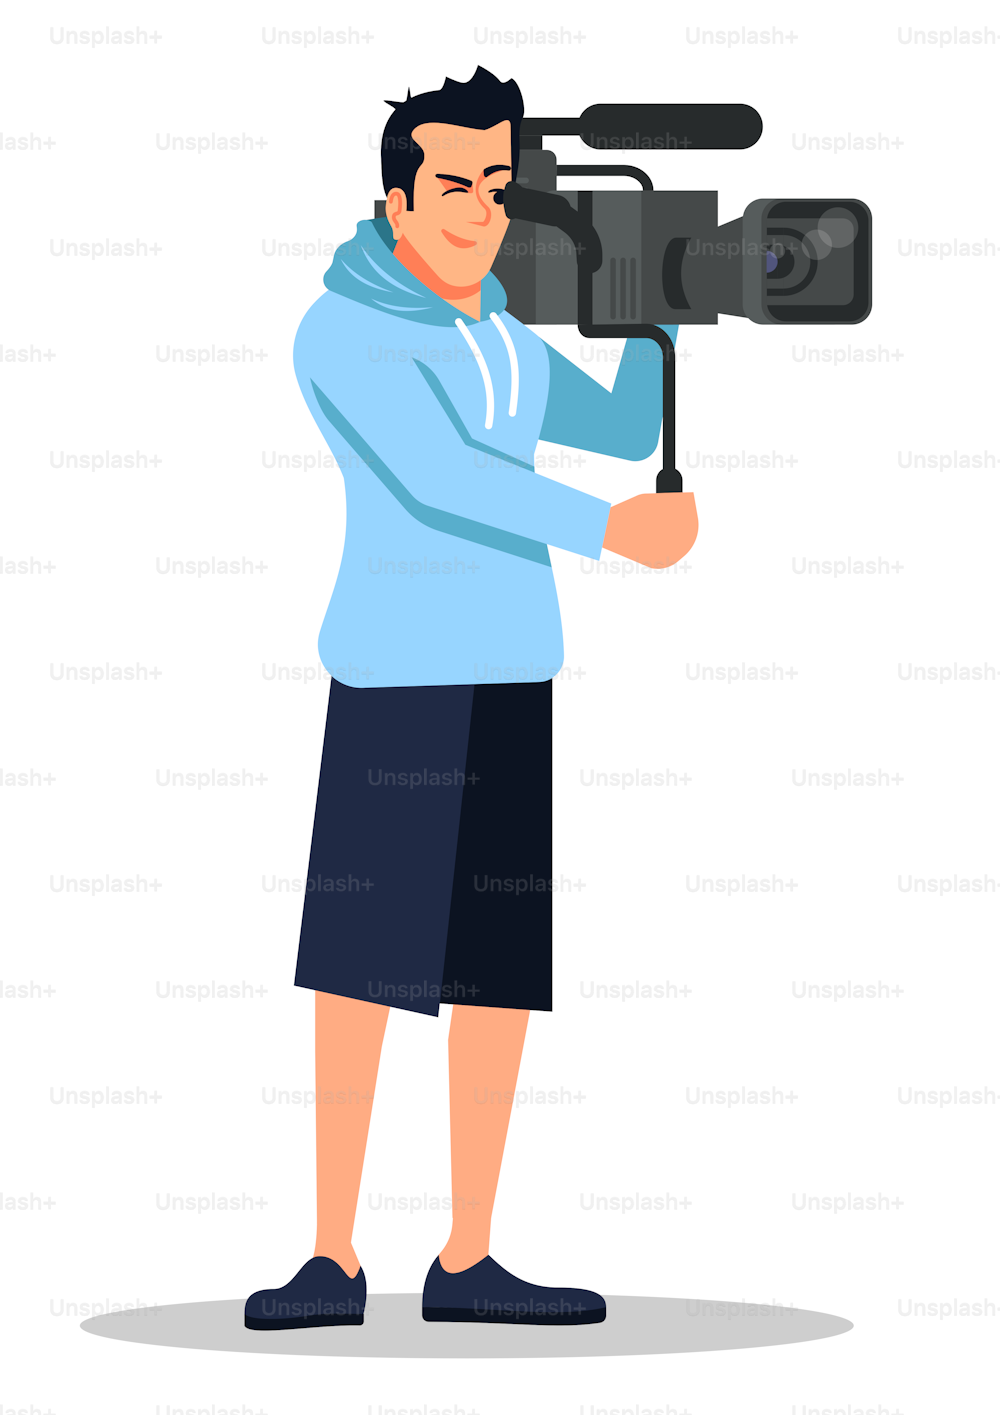 Shoot movie semi flat RGB color vector illustration. Mass media occupation. Filmmaker with shoulder mounted camera isolated cartoon character on white background